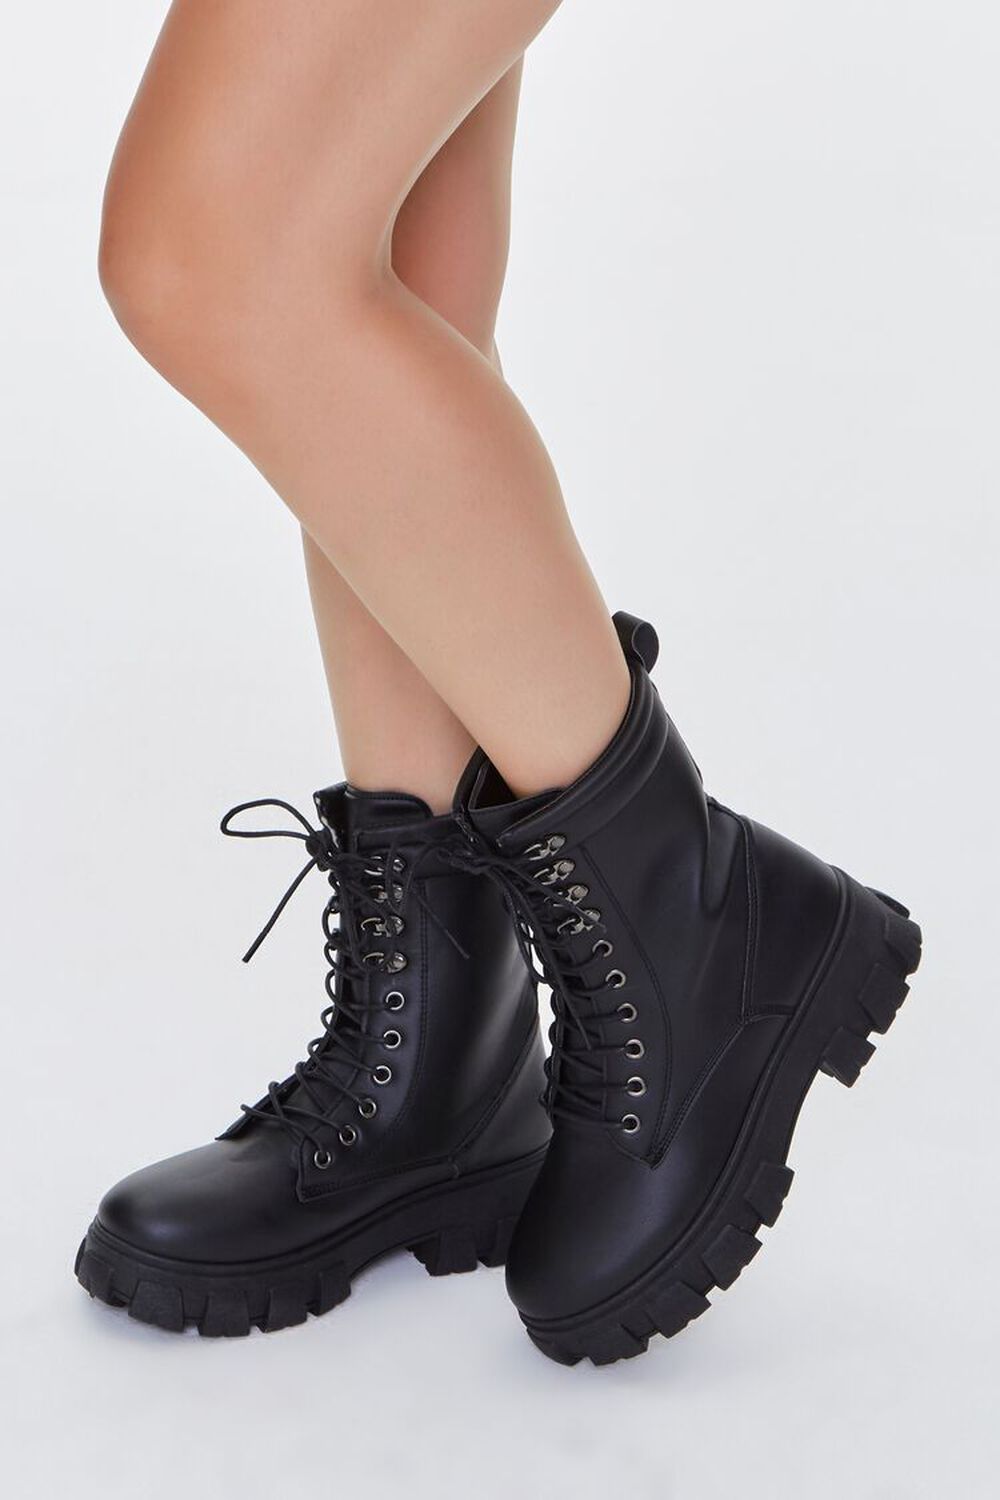 BLACK Faux Leather Lace-Up Chunky Booties, image 1